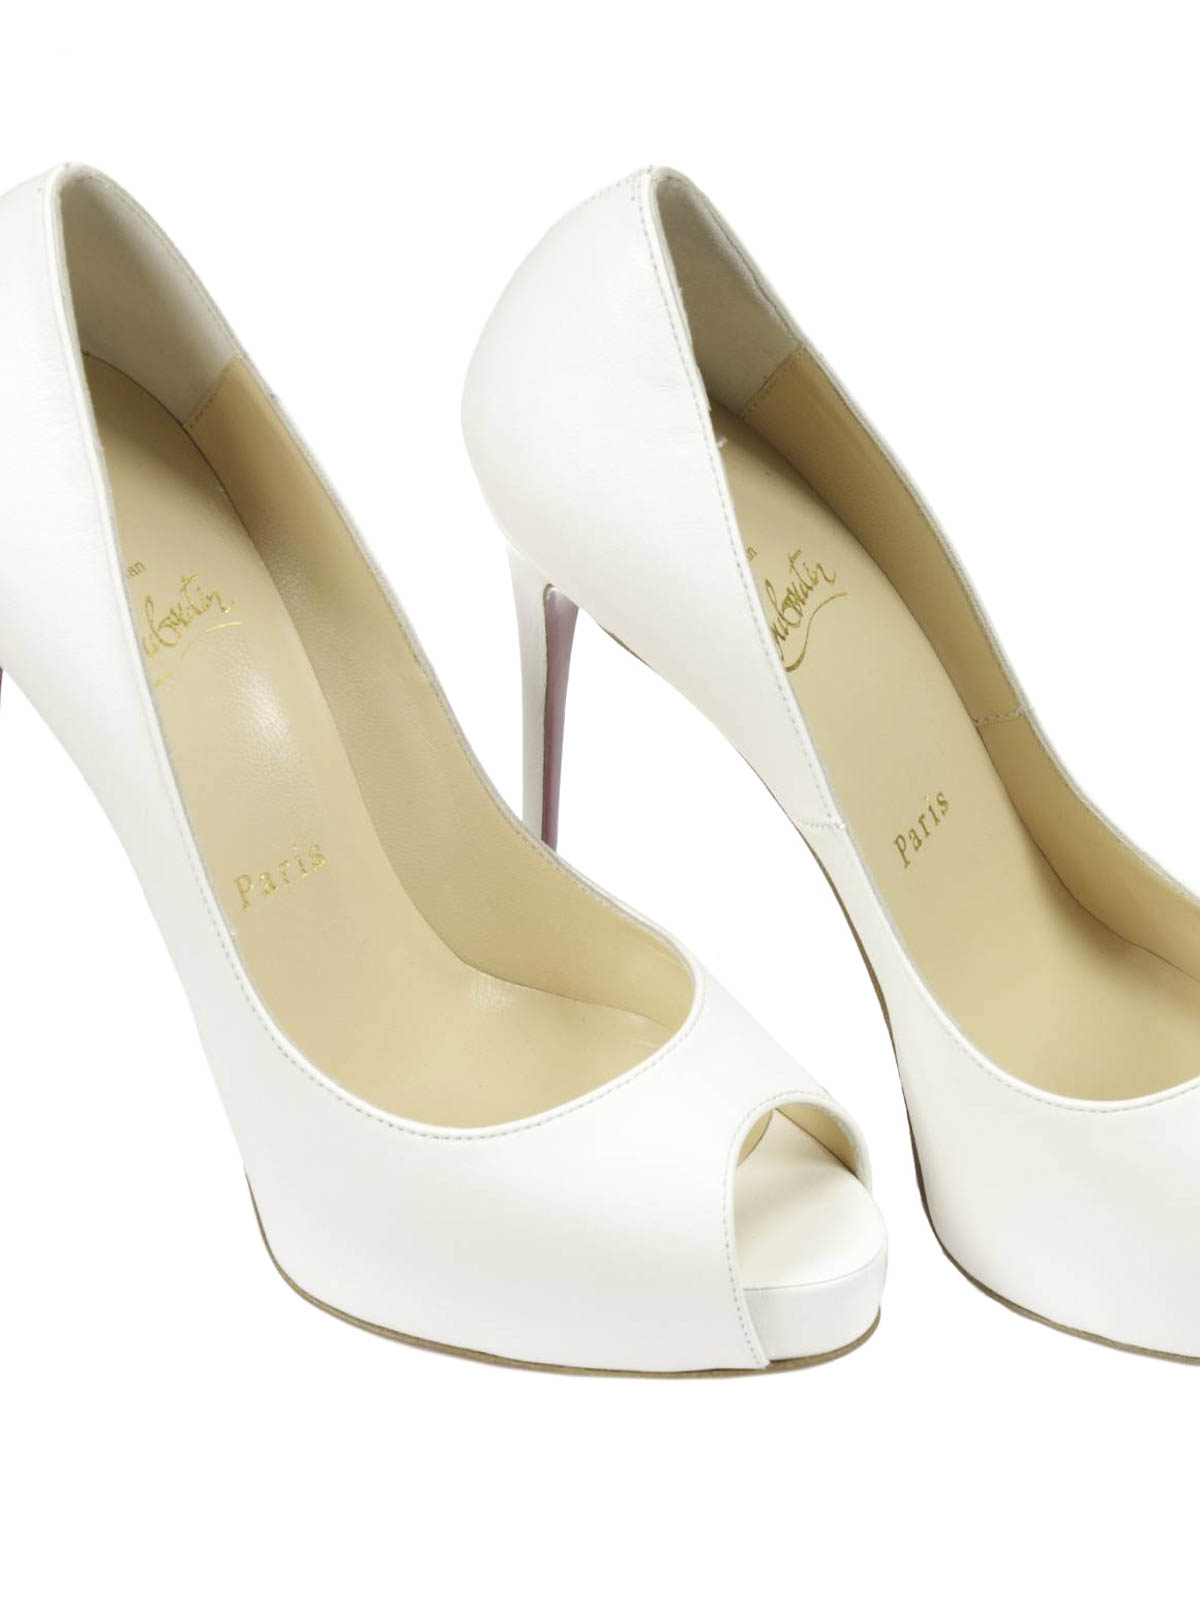 bouton shoes christian louboutin - New Very Prive pumps by Christian Louboutin - court shoes | iKRIX